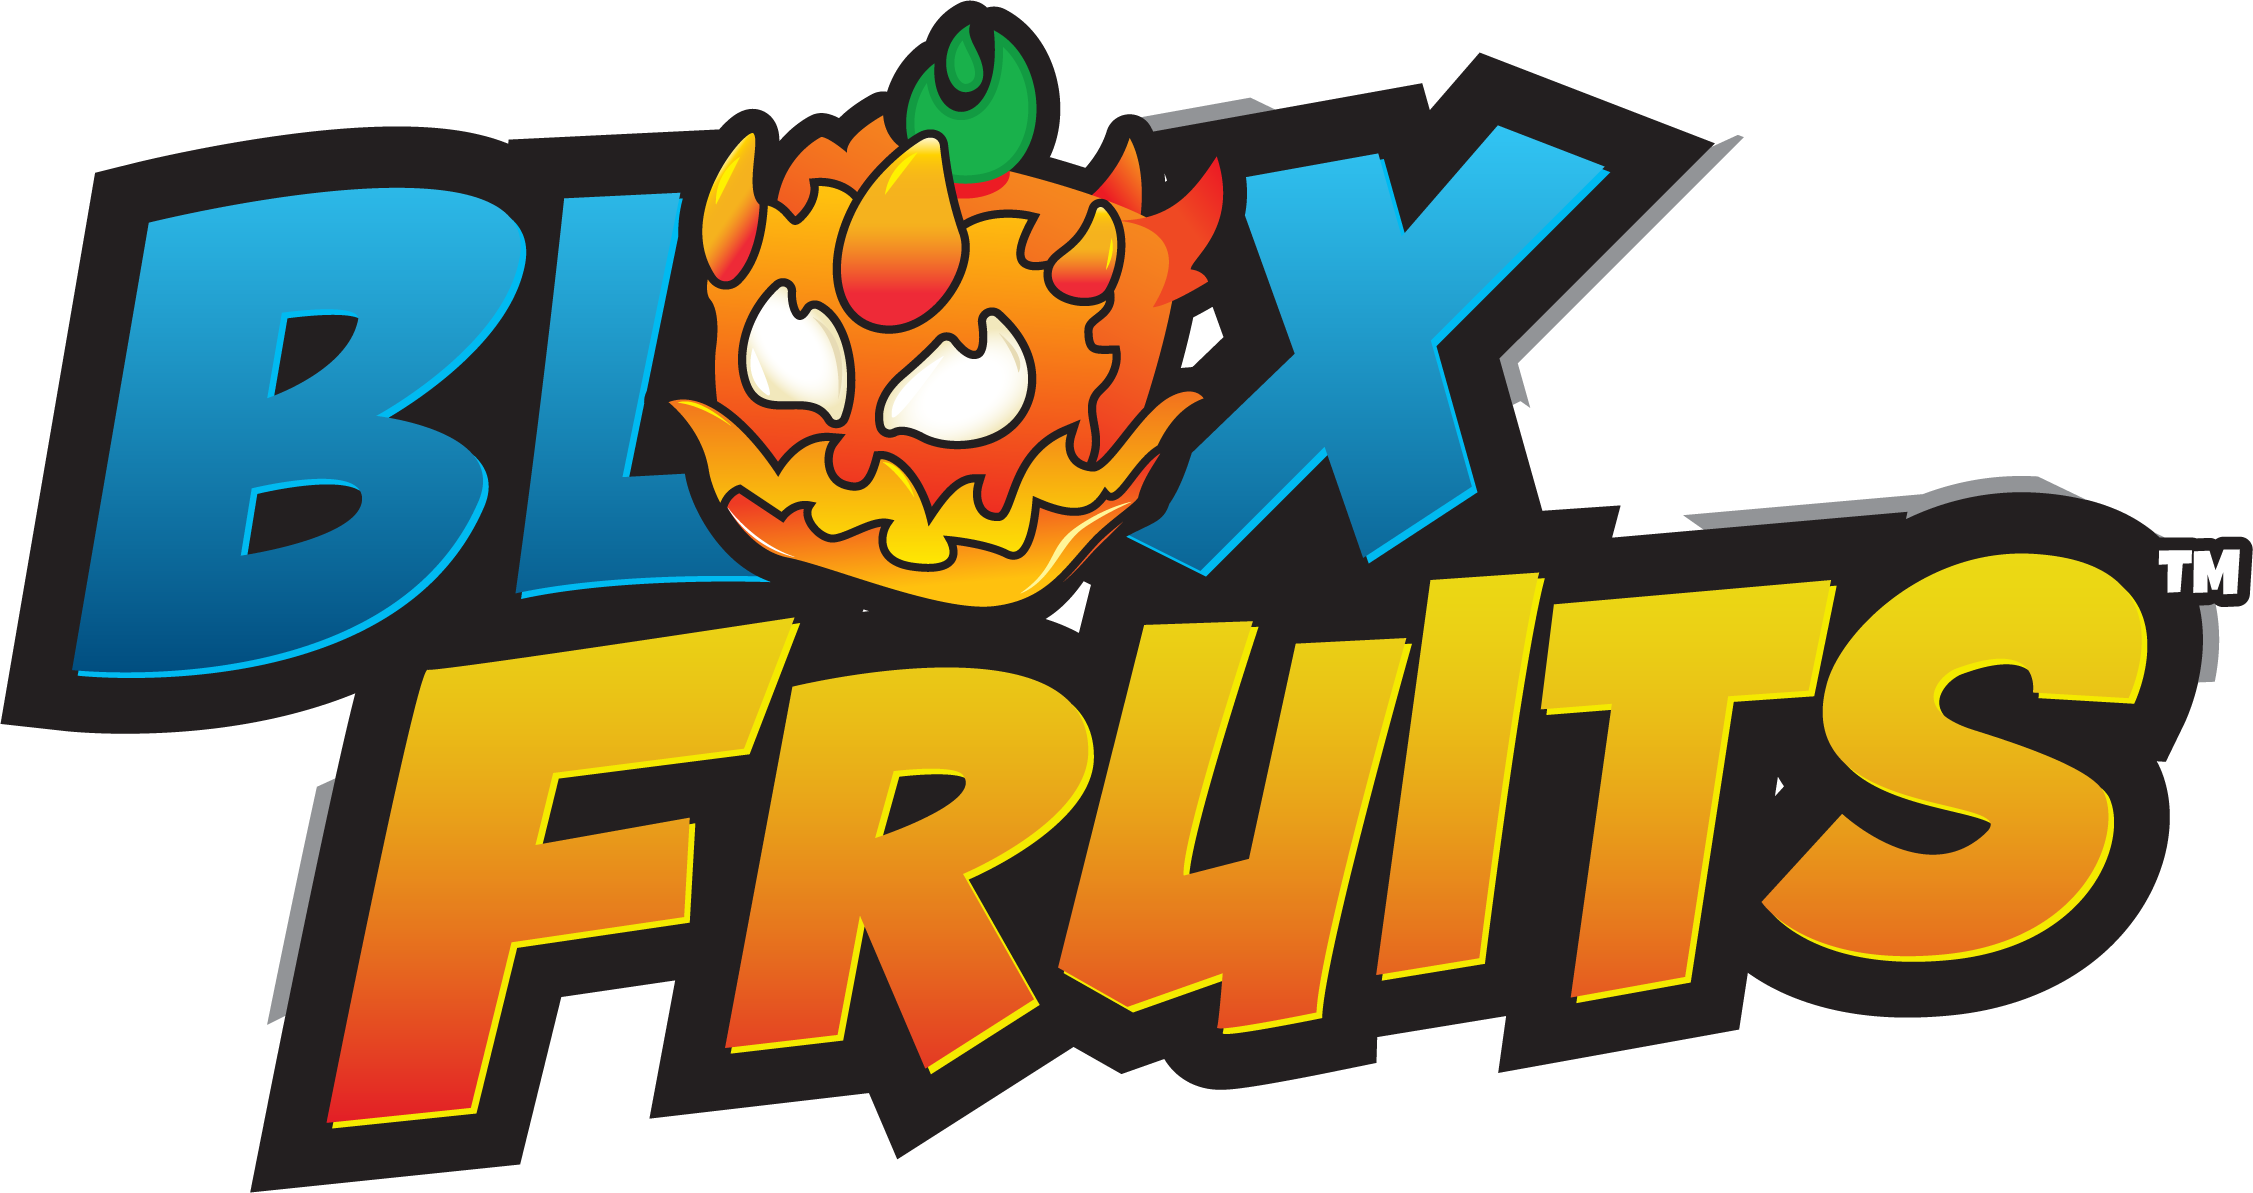 Blox Fruits – Official Site & Store by Gamer Robot